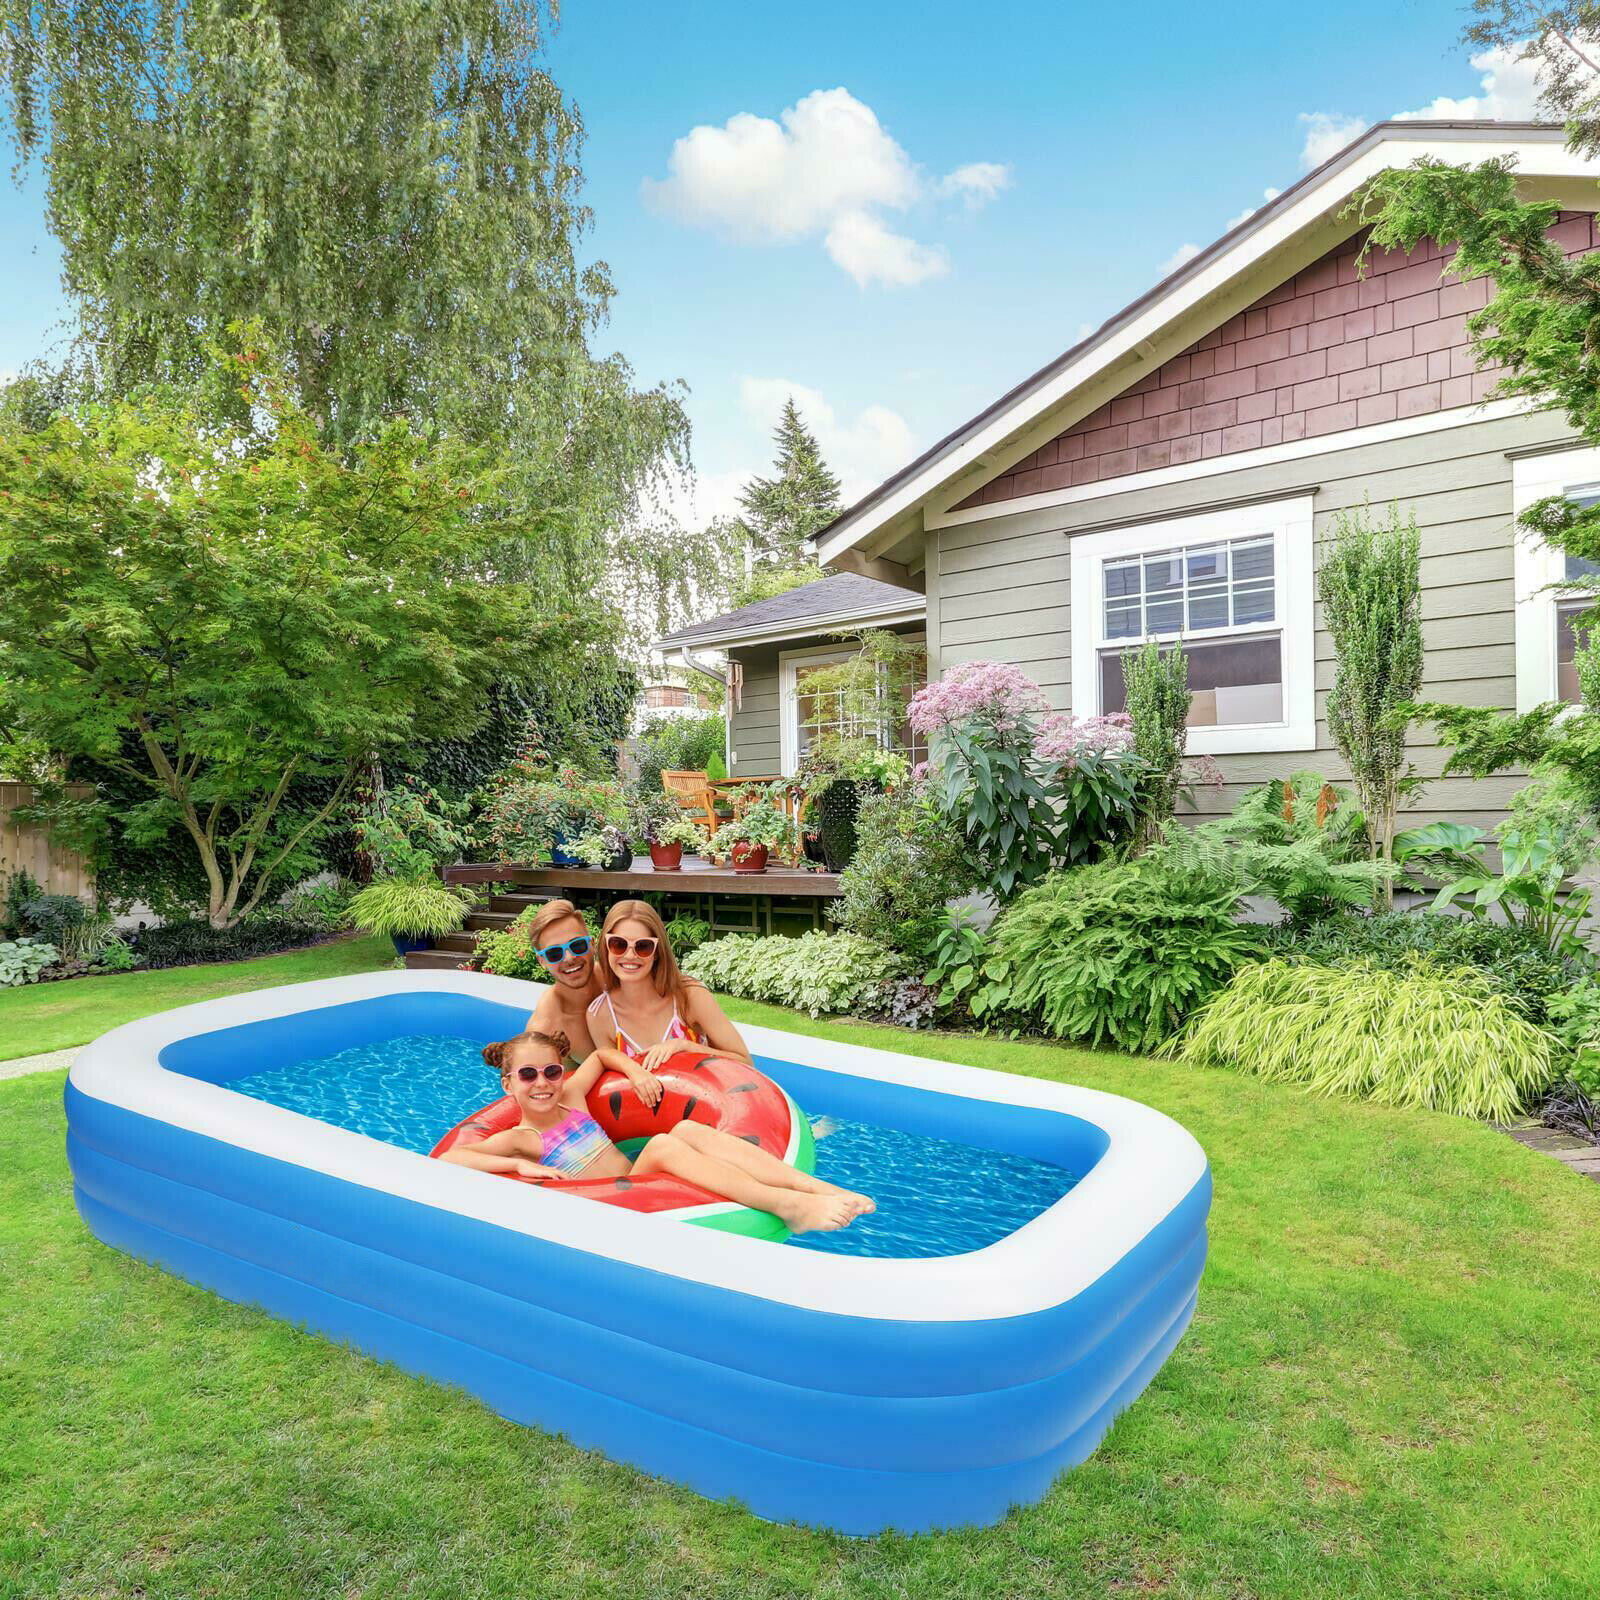 Details about   Large Family Swimming Pool Outdoor Garden Summer Inflatable Kids Pools 6 sizes 